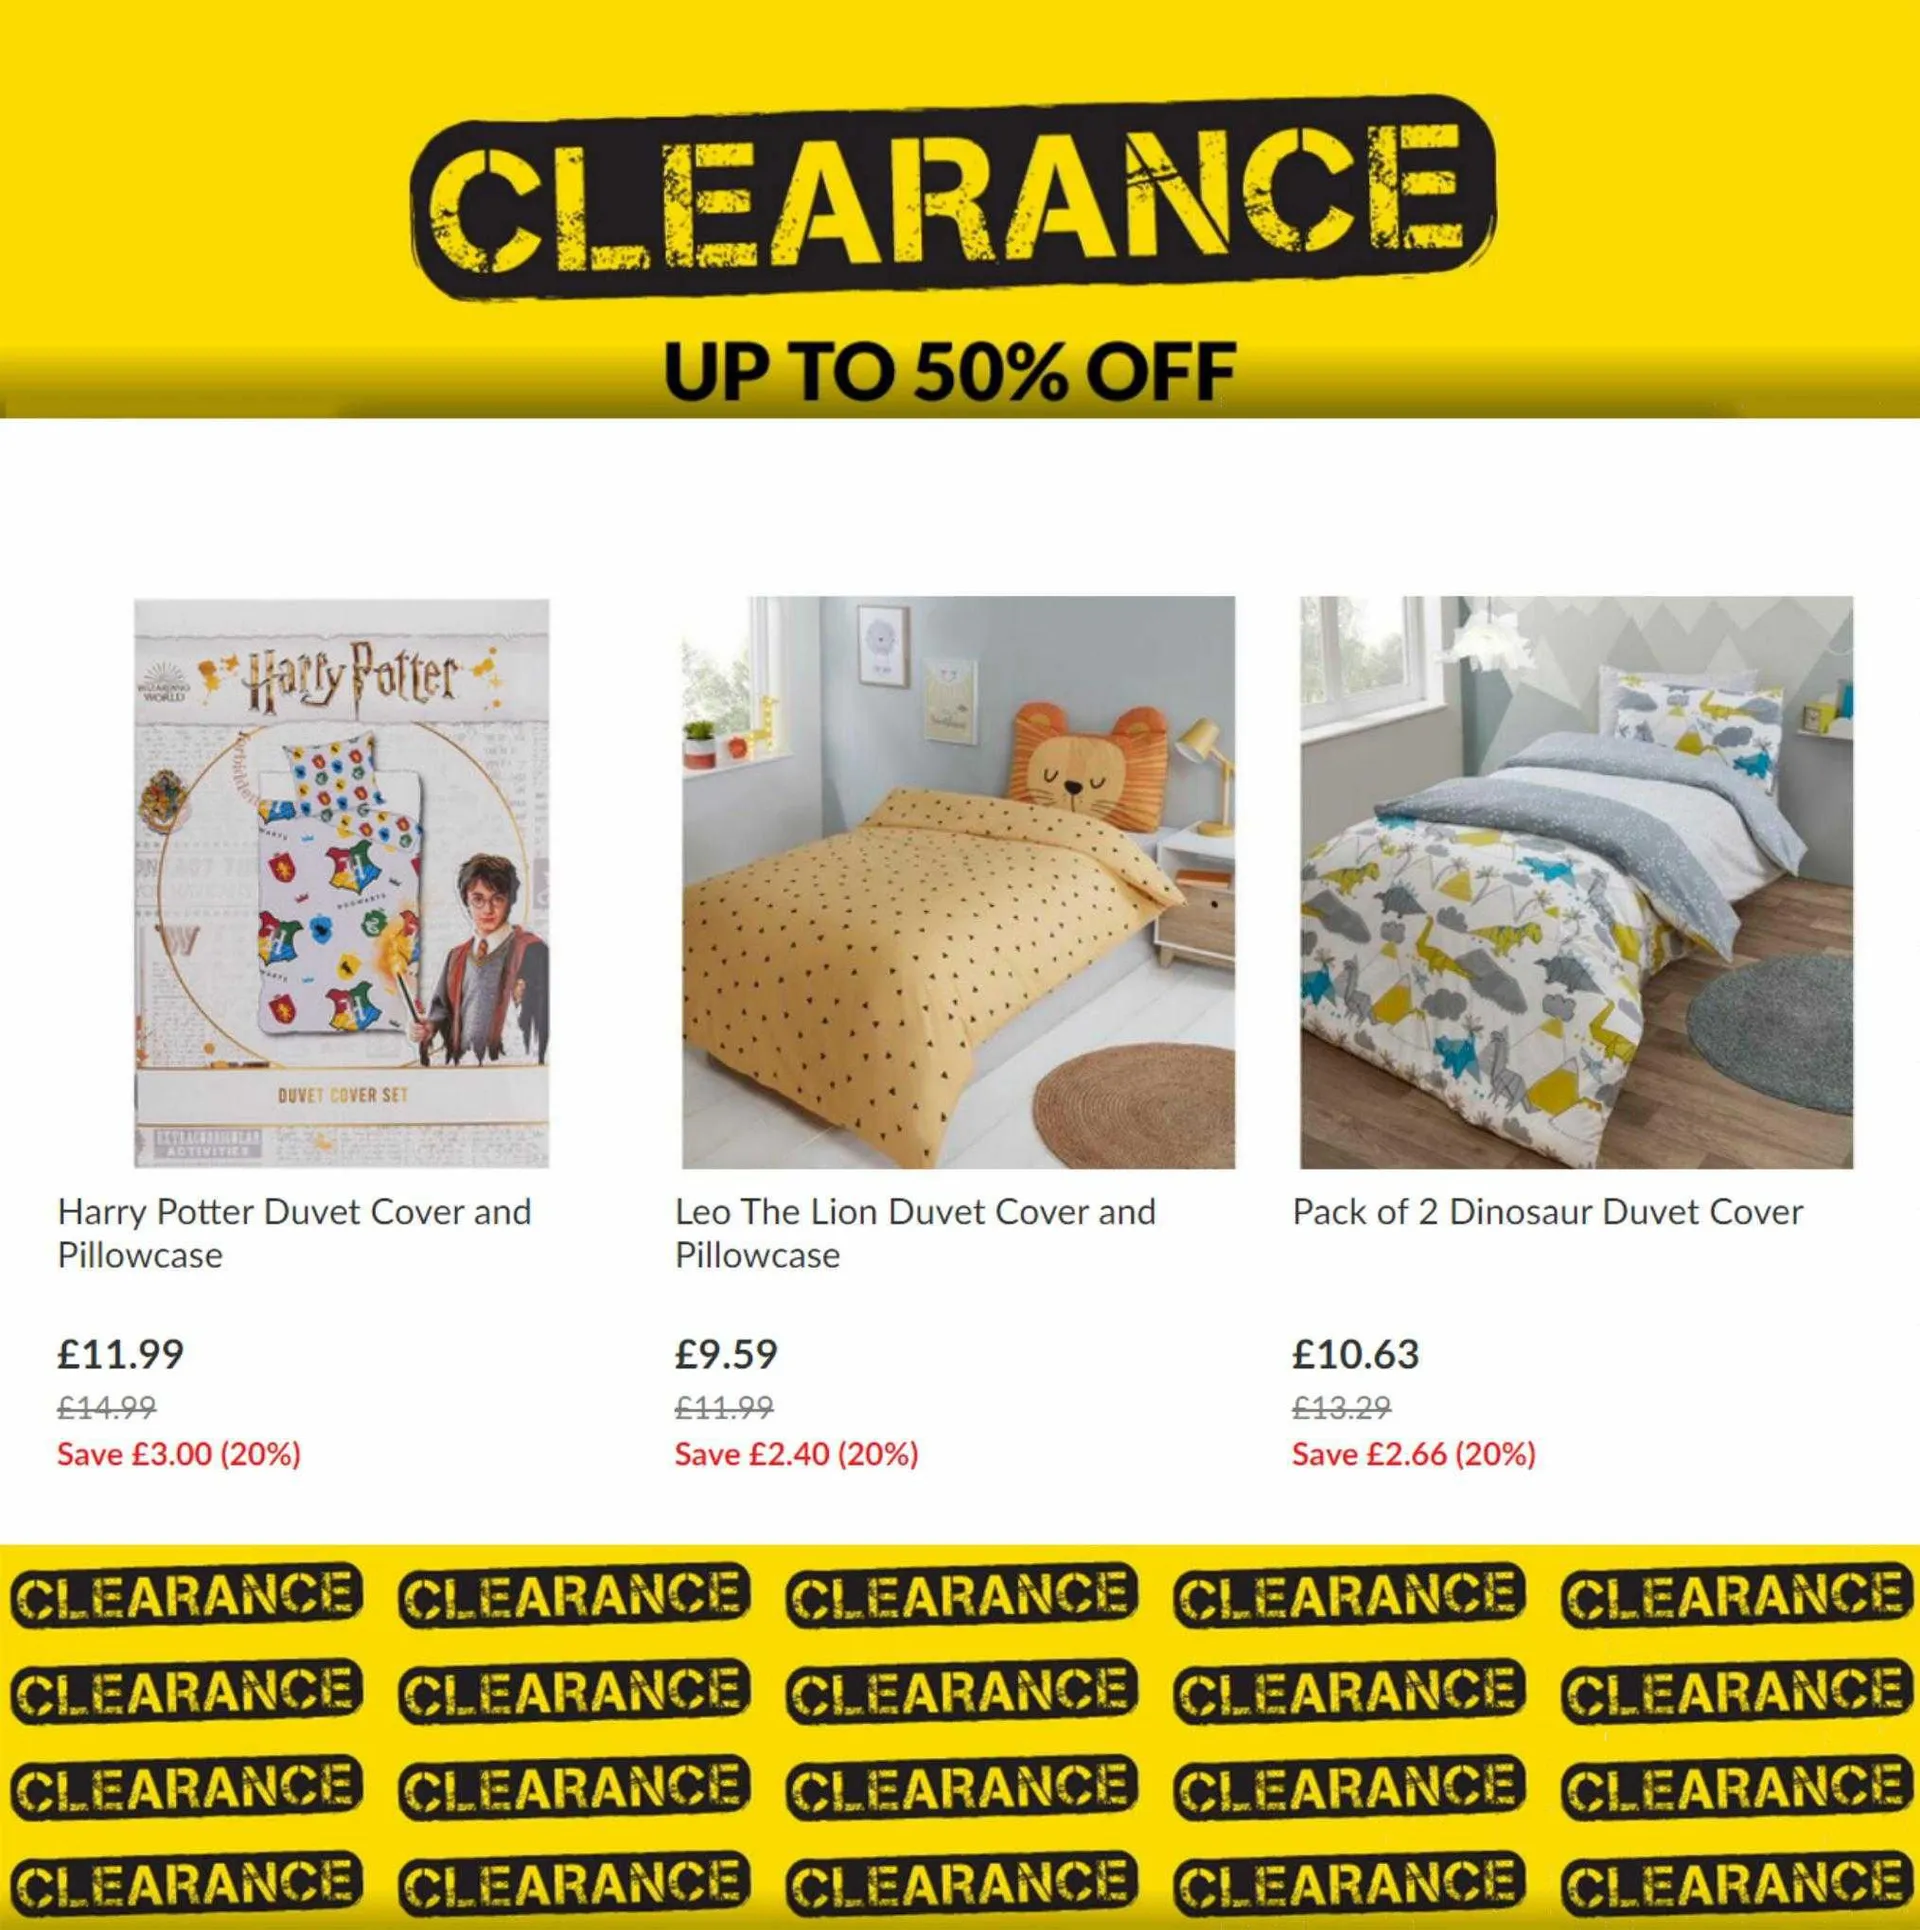 The Range Weekly Offers - 2